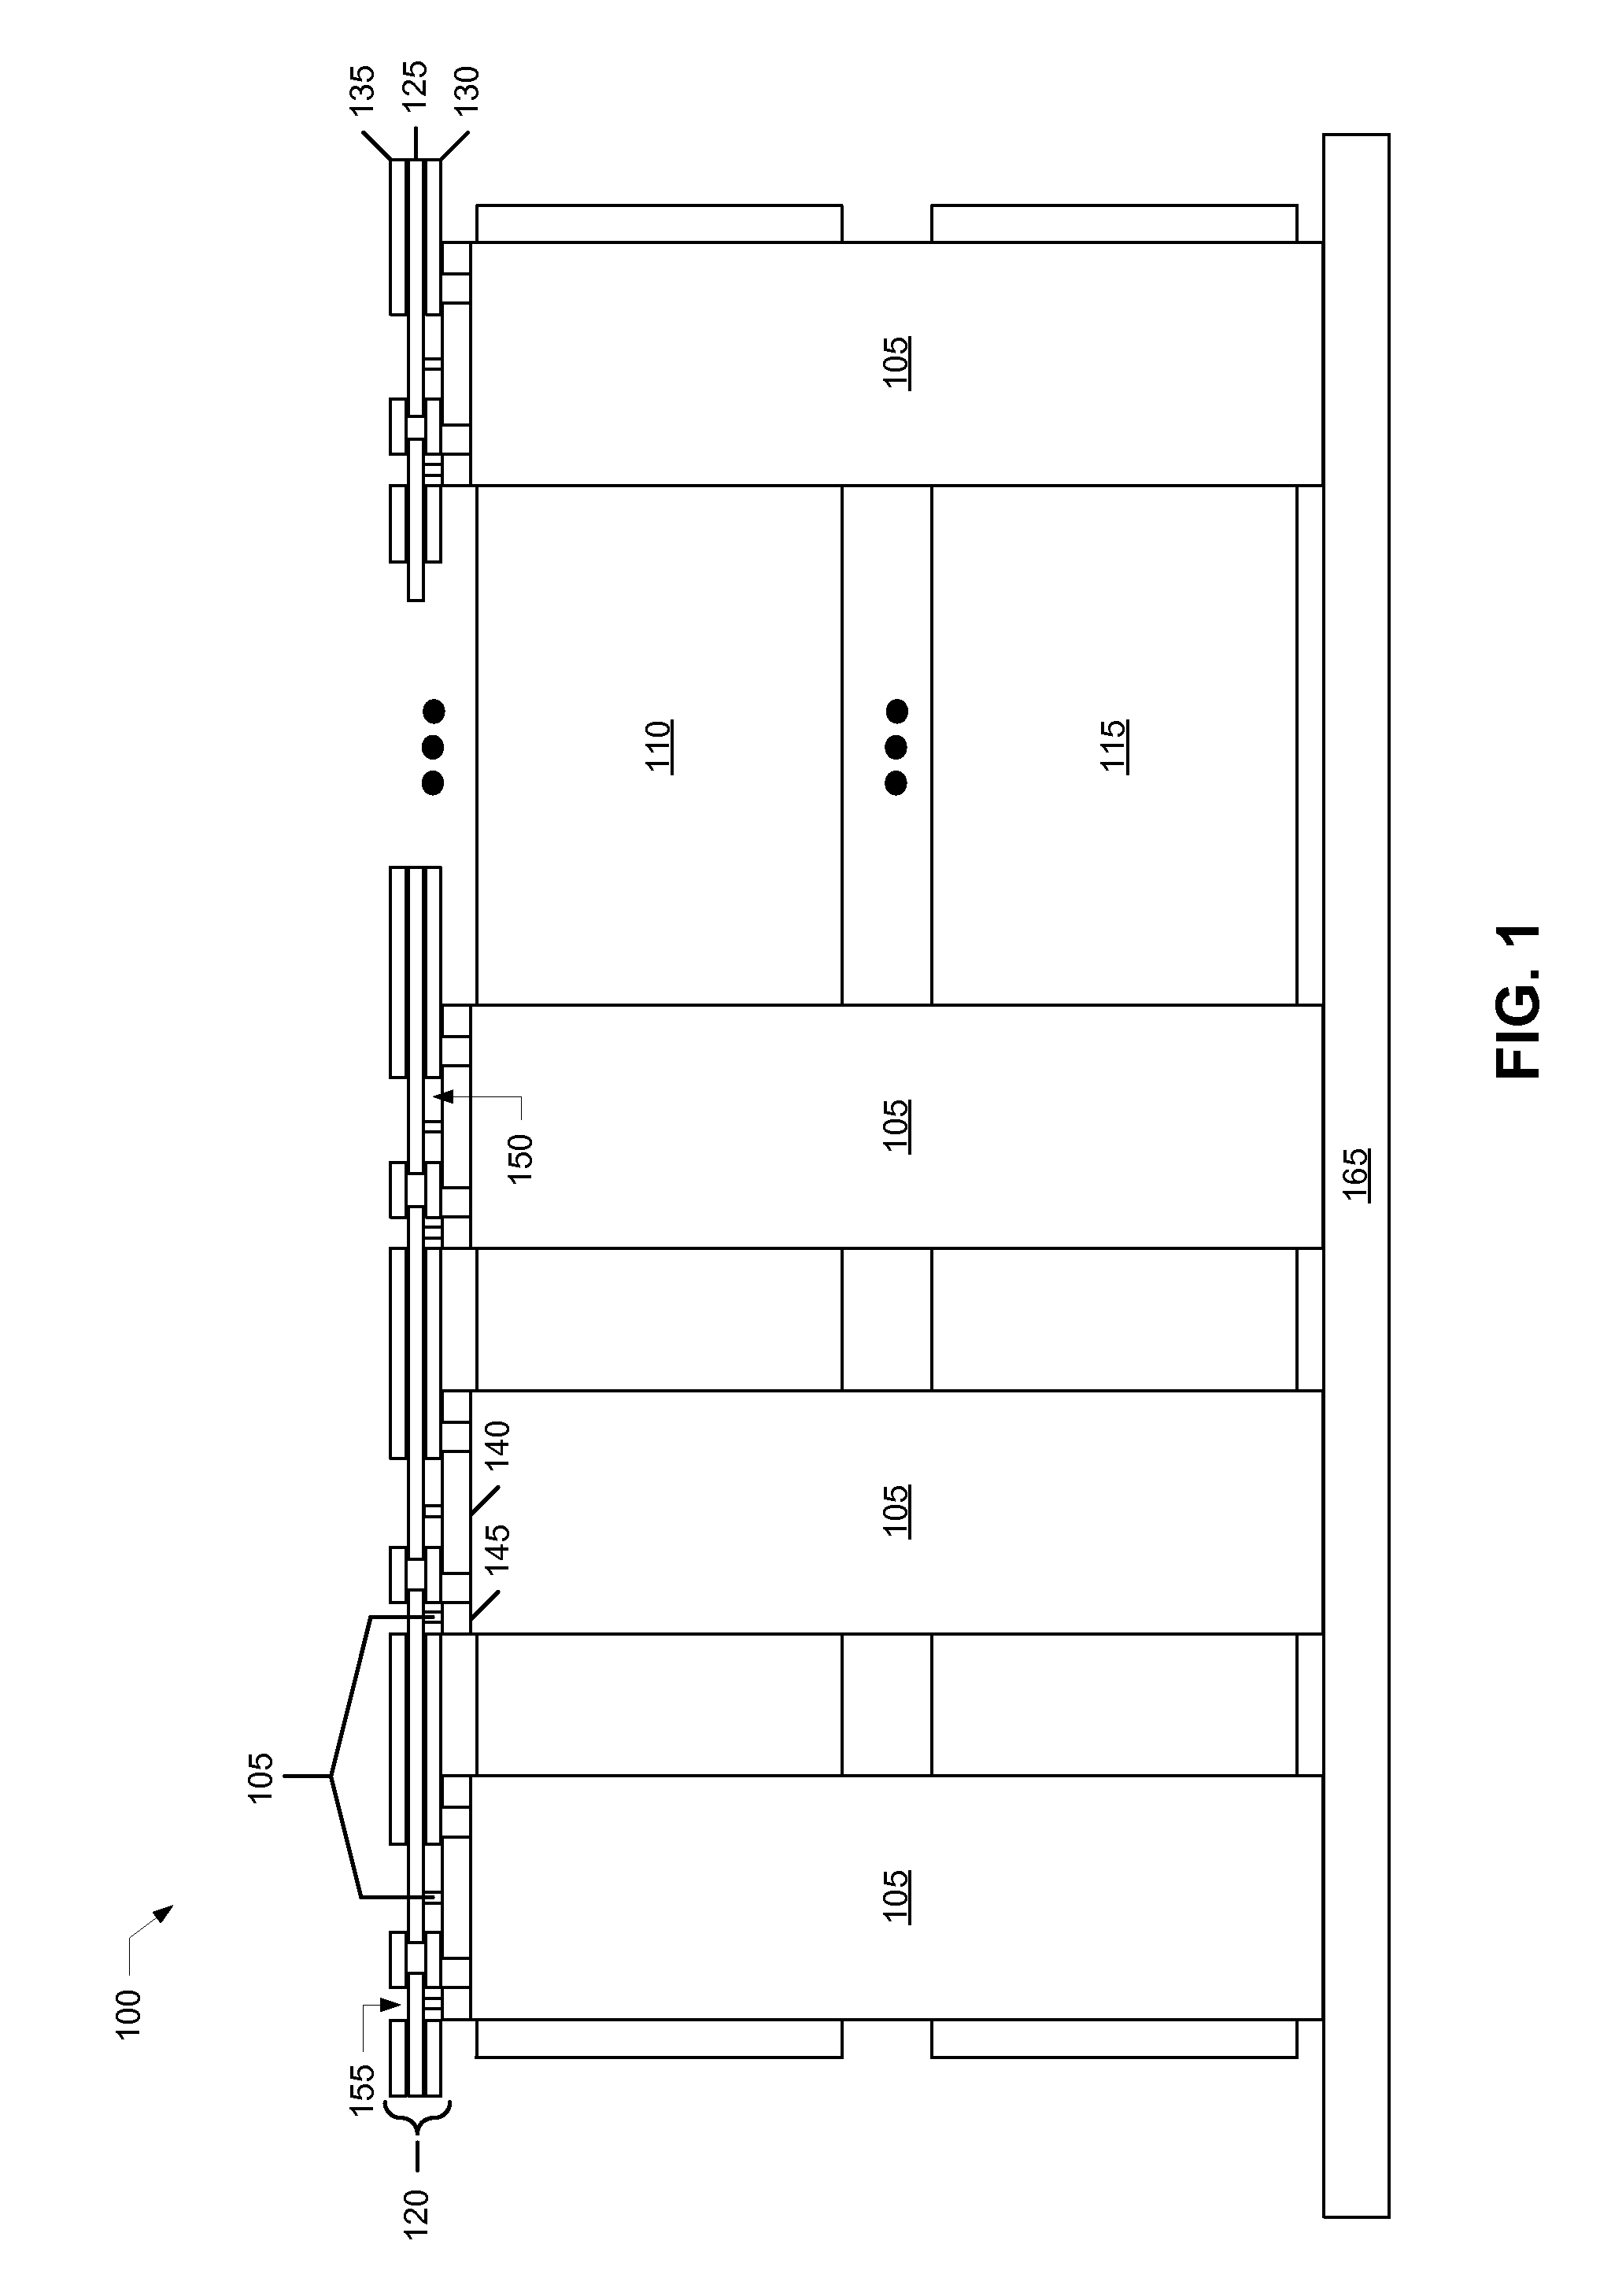 Flexible printed circuit as high voltage interconnect in battery modules